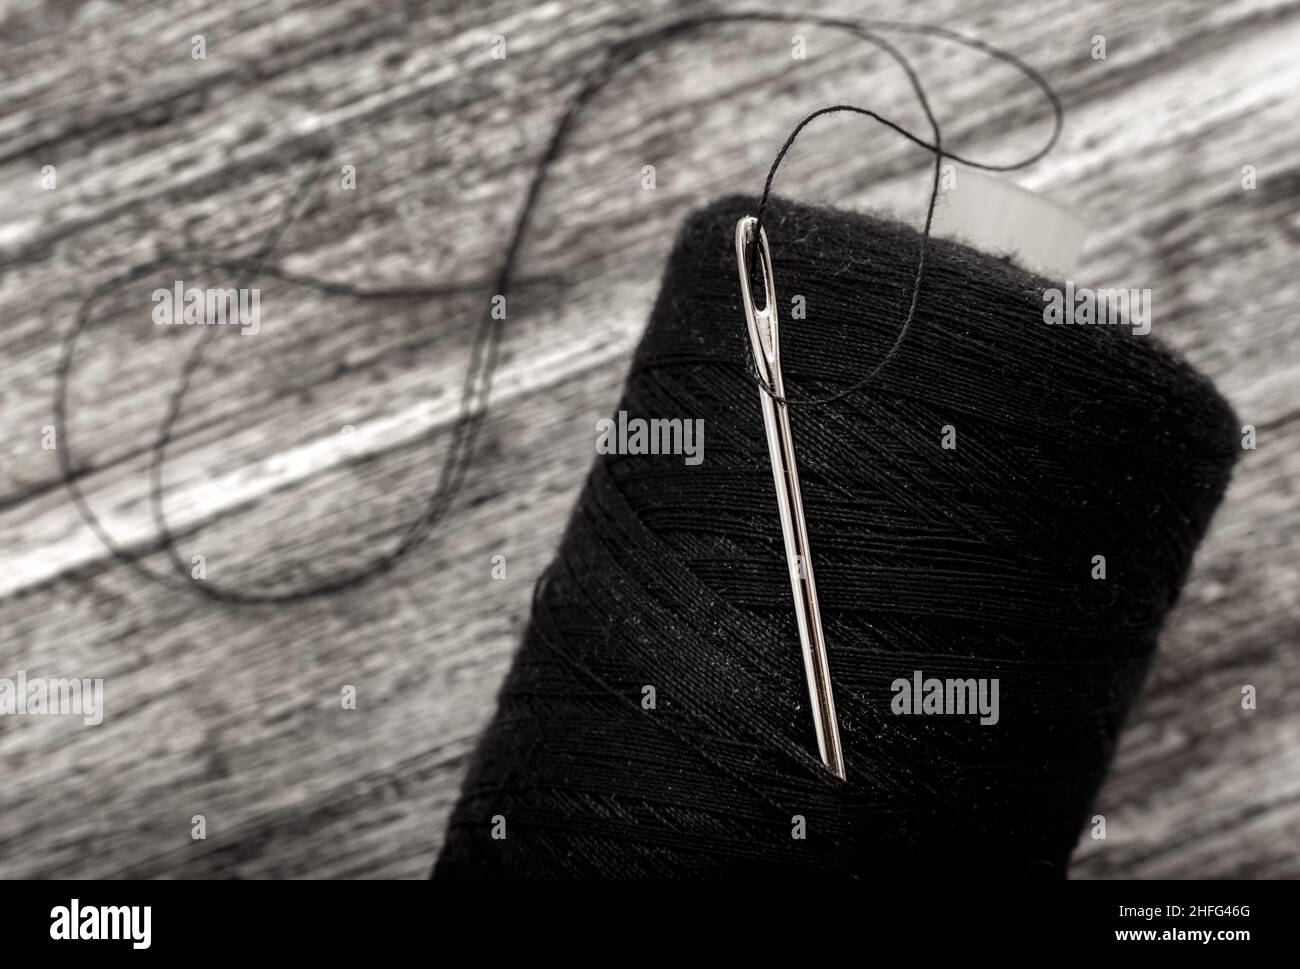 Black Thread with a Needle on an Ancient Antique Old Wooden Coil